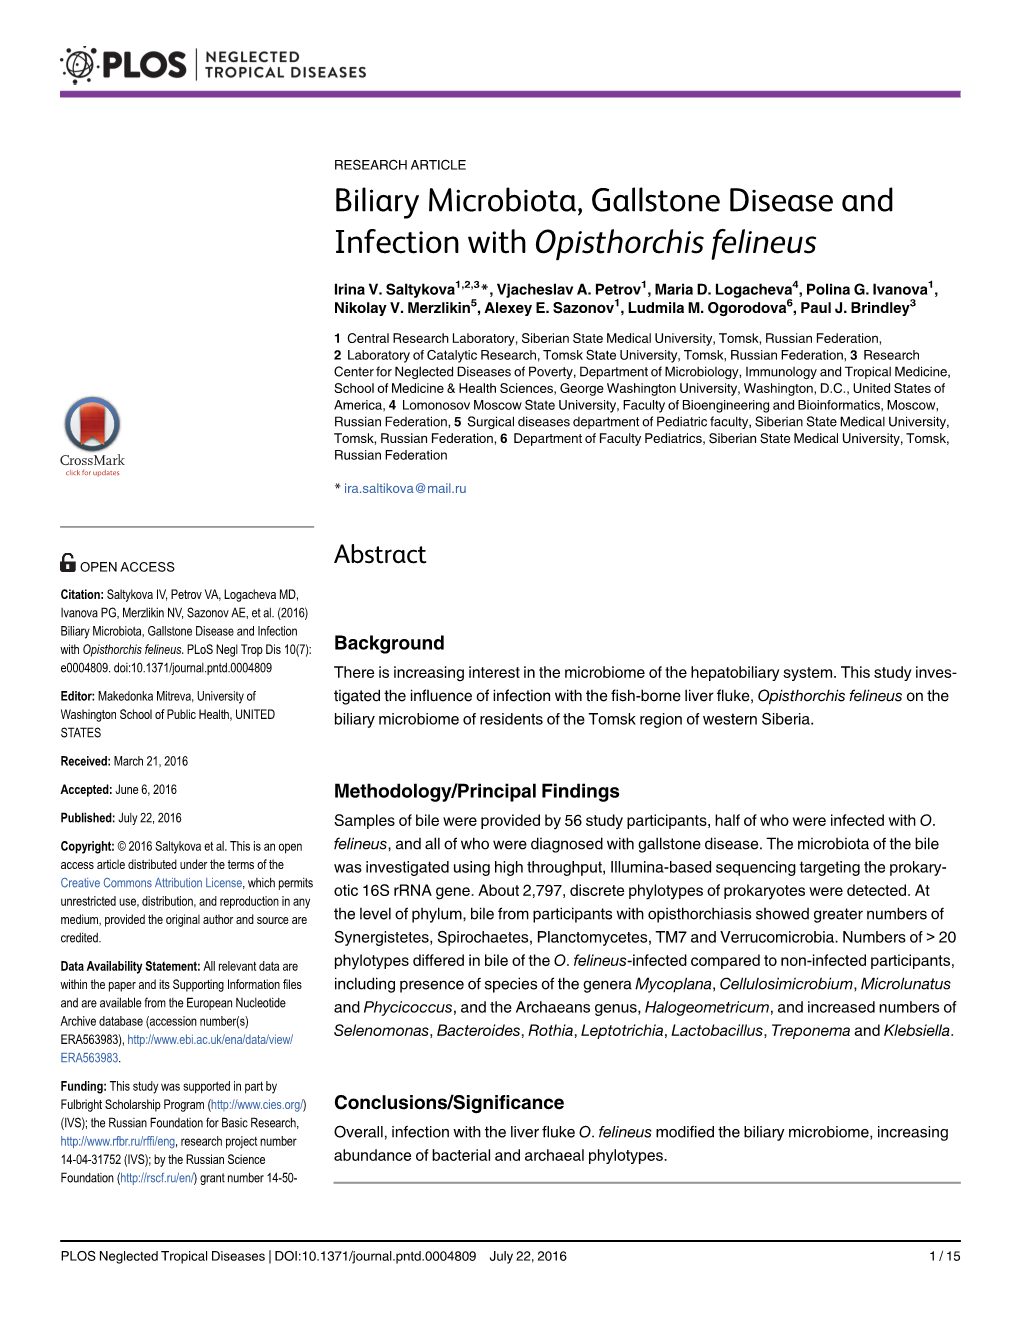 Biliary Microbiota, Gallstone Disease and Infection with Opisthorchis Felineus